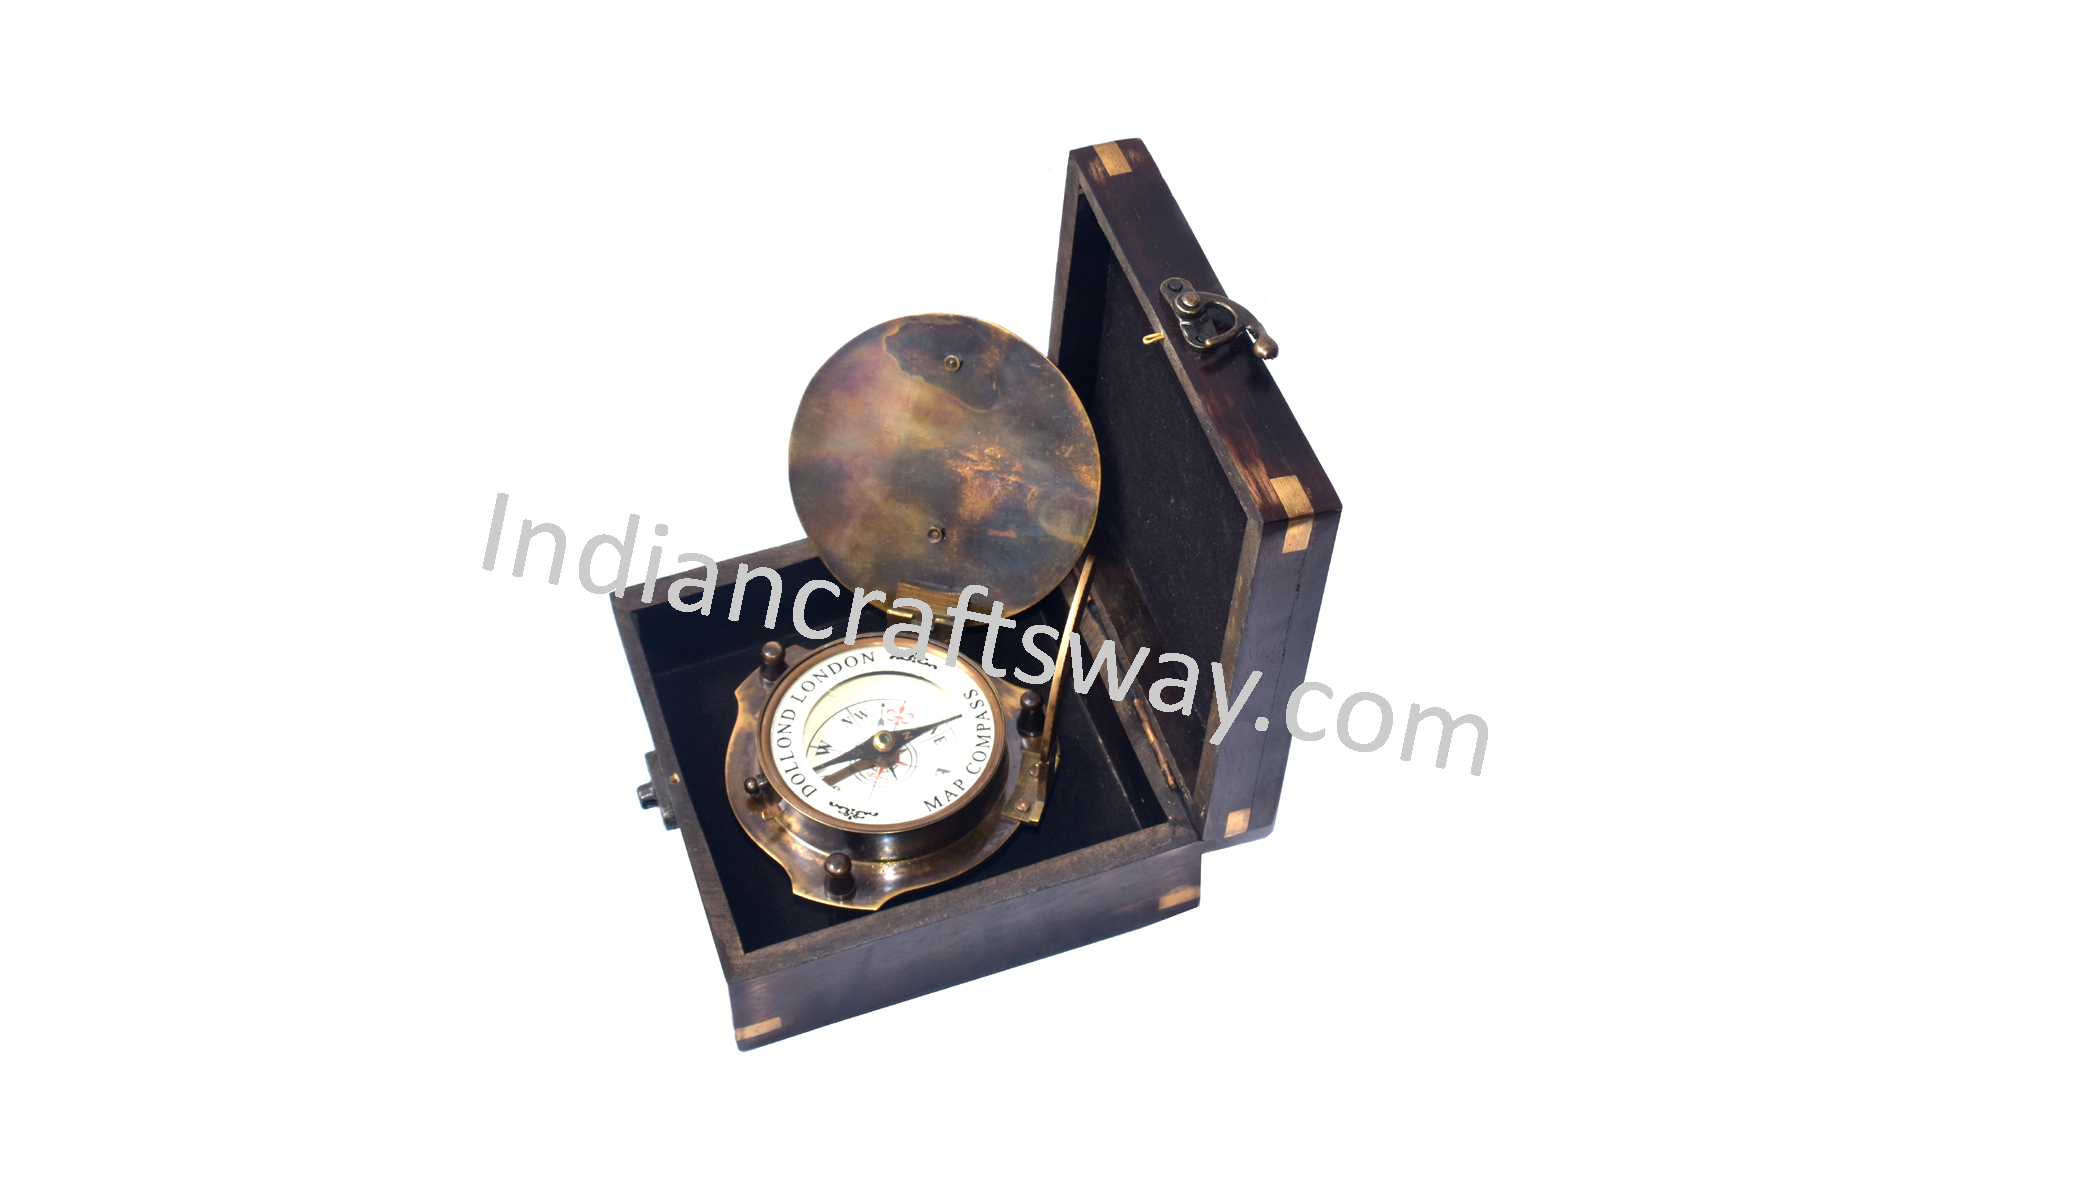 Antique Brass sundial compass with wooden box 2 tone finish